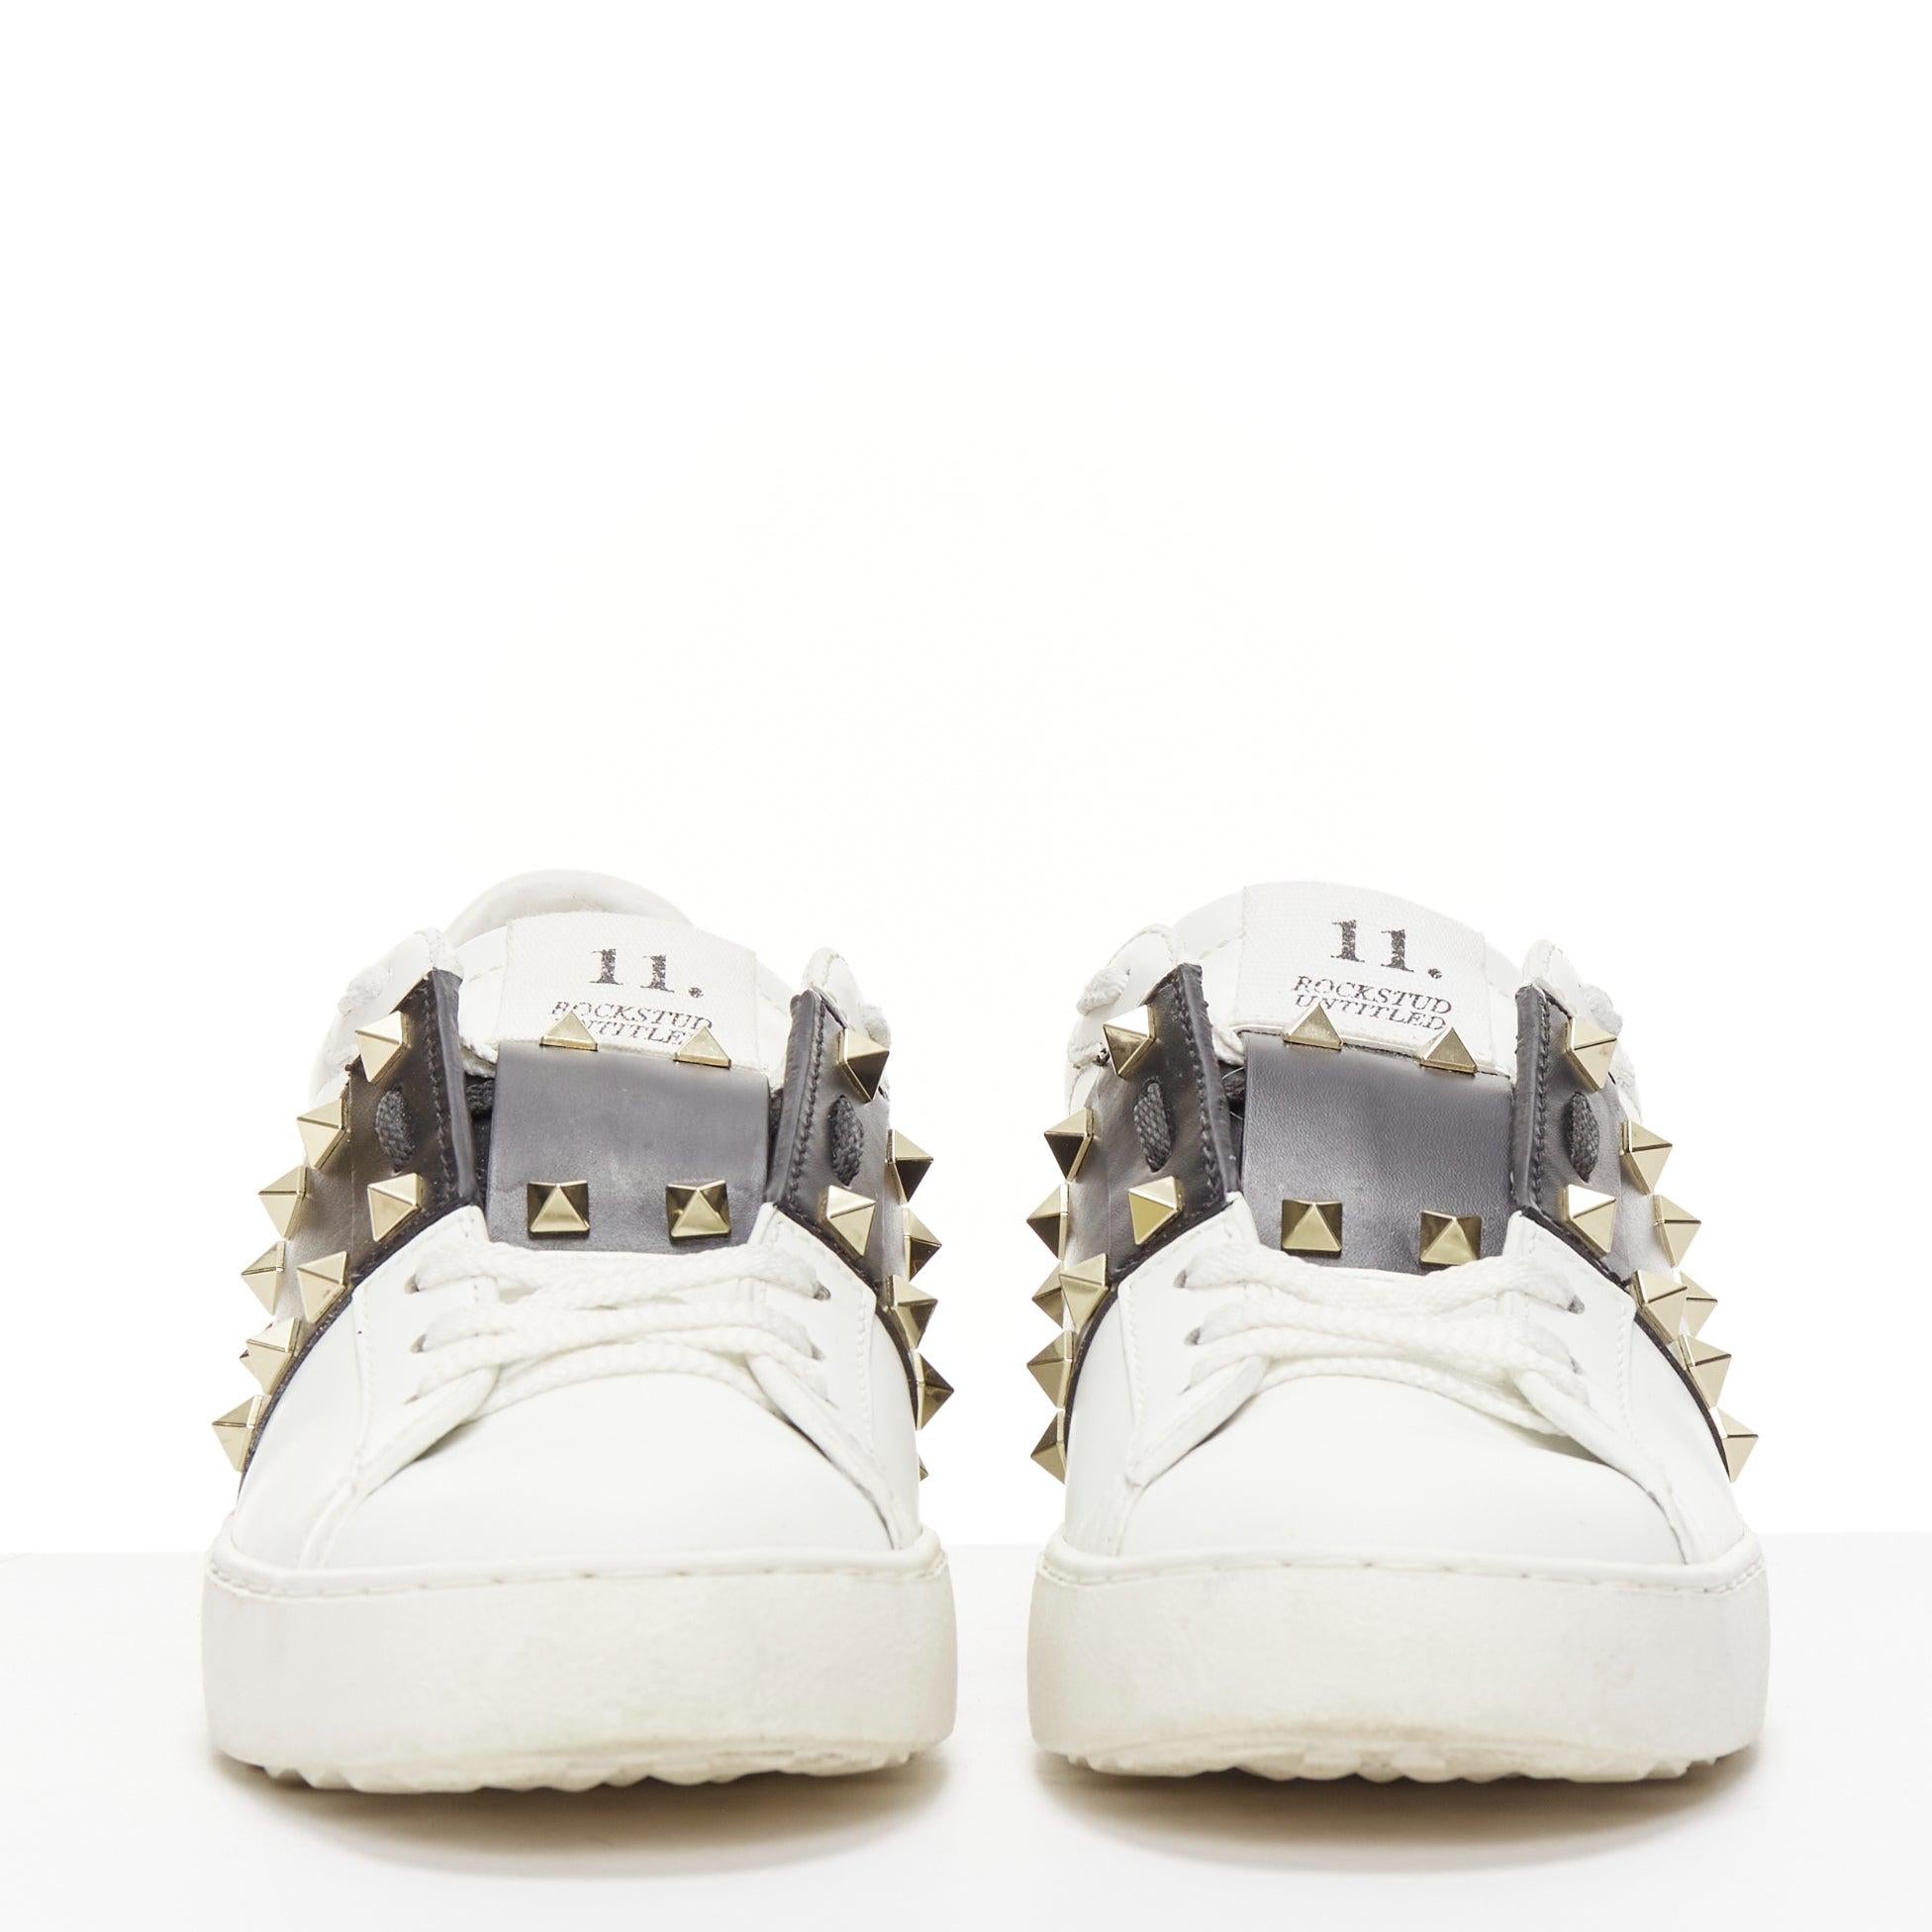 Women's VALENTINO Rockstud Untitled Open black white leather studded sneakers EU37